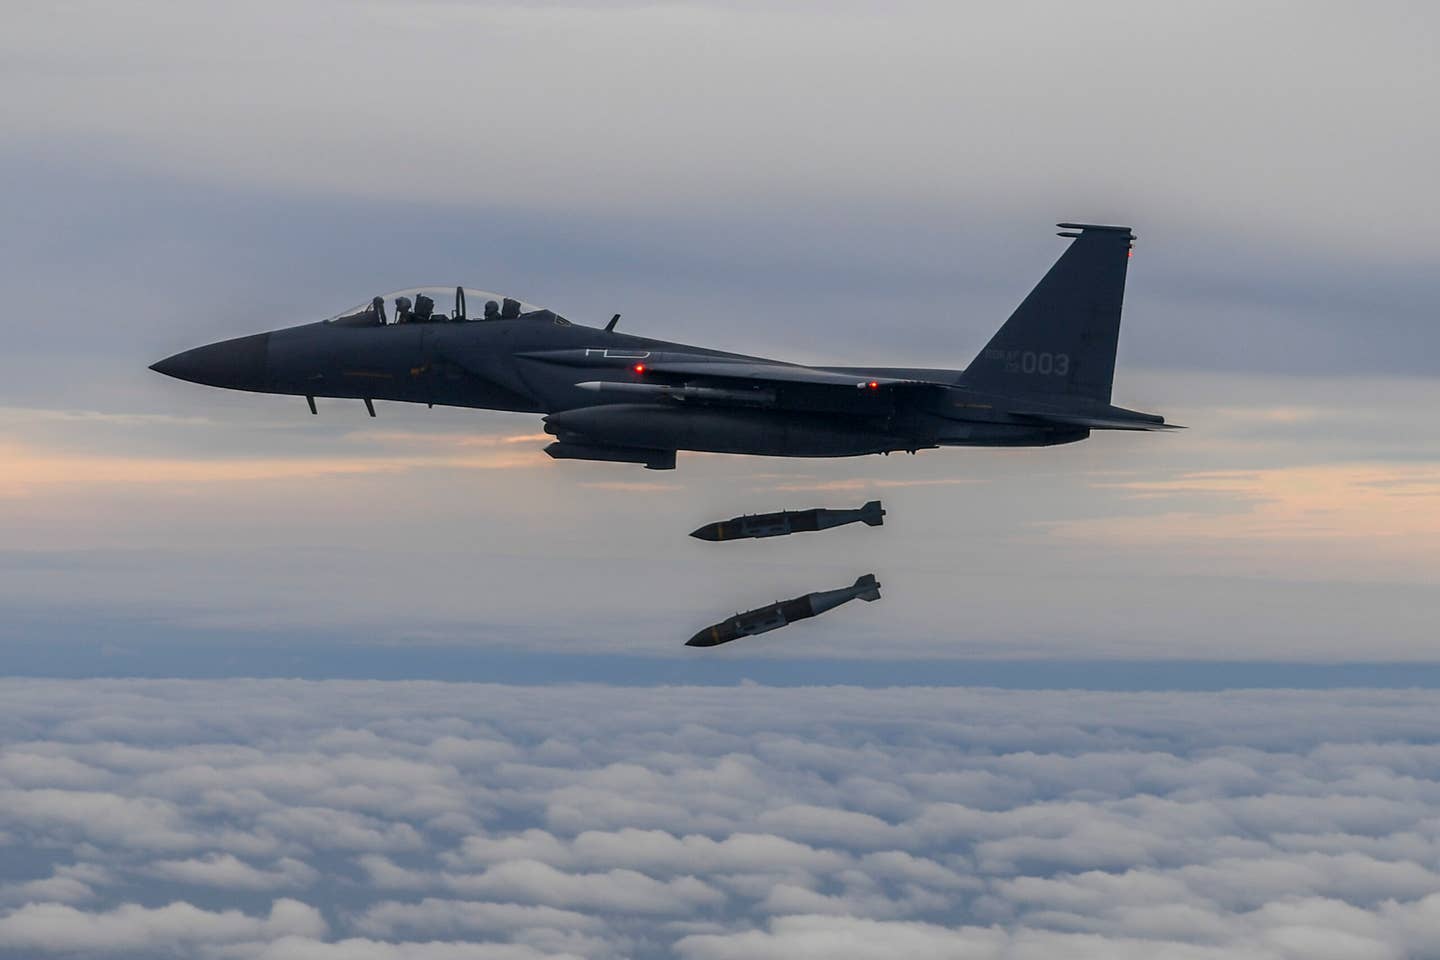 A ROKAF F-15K drops two Joint Direct Attack Munitions (JDAM) onto an island target in response to a North Korean IRBM launch earlier the same day October 4, 2022. <em>Photo by South Korean Defense Ministry via Getty Images</em>